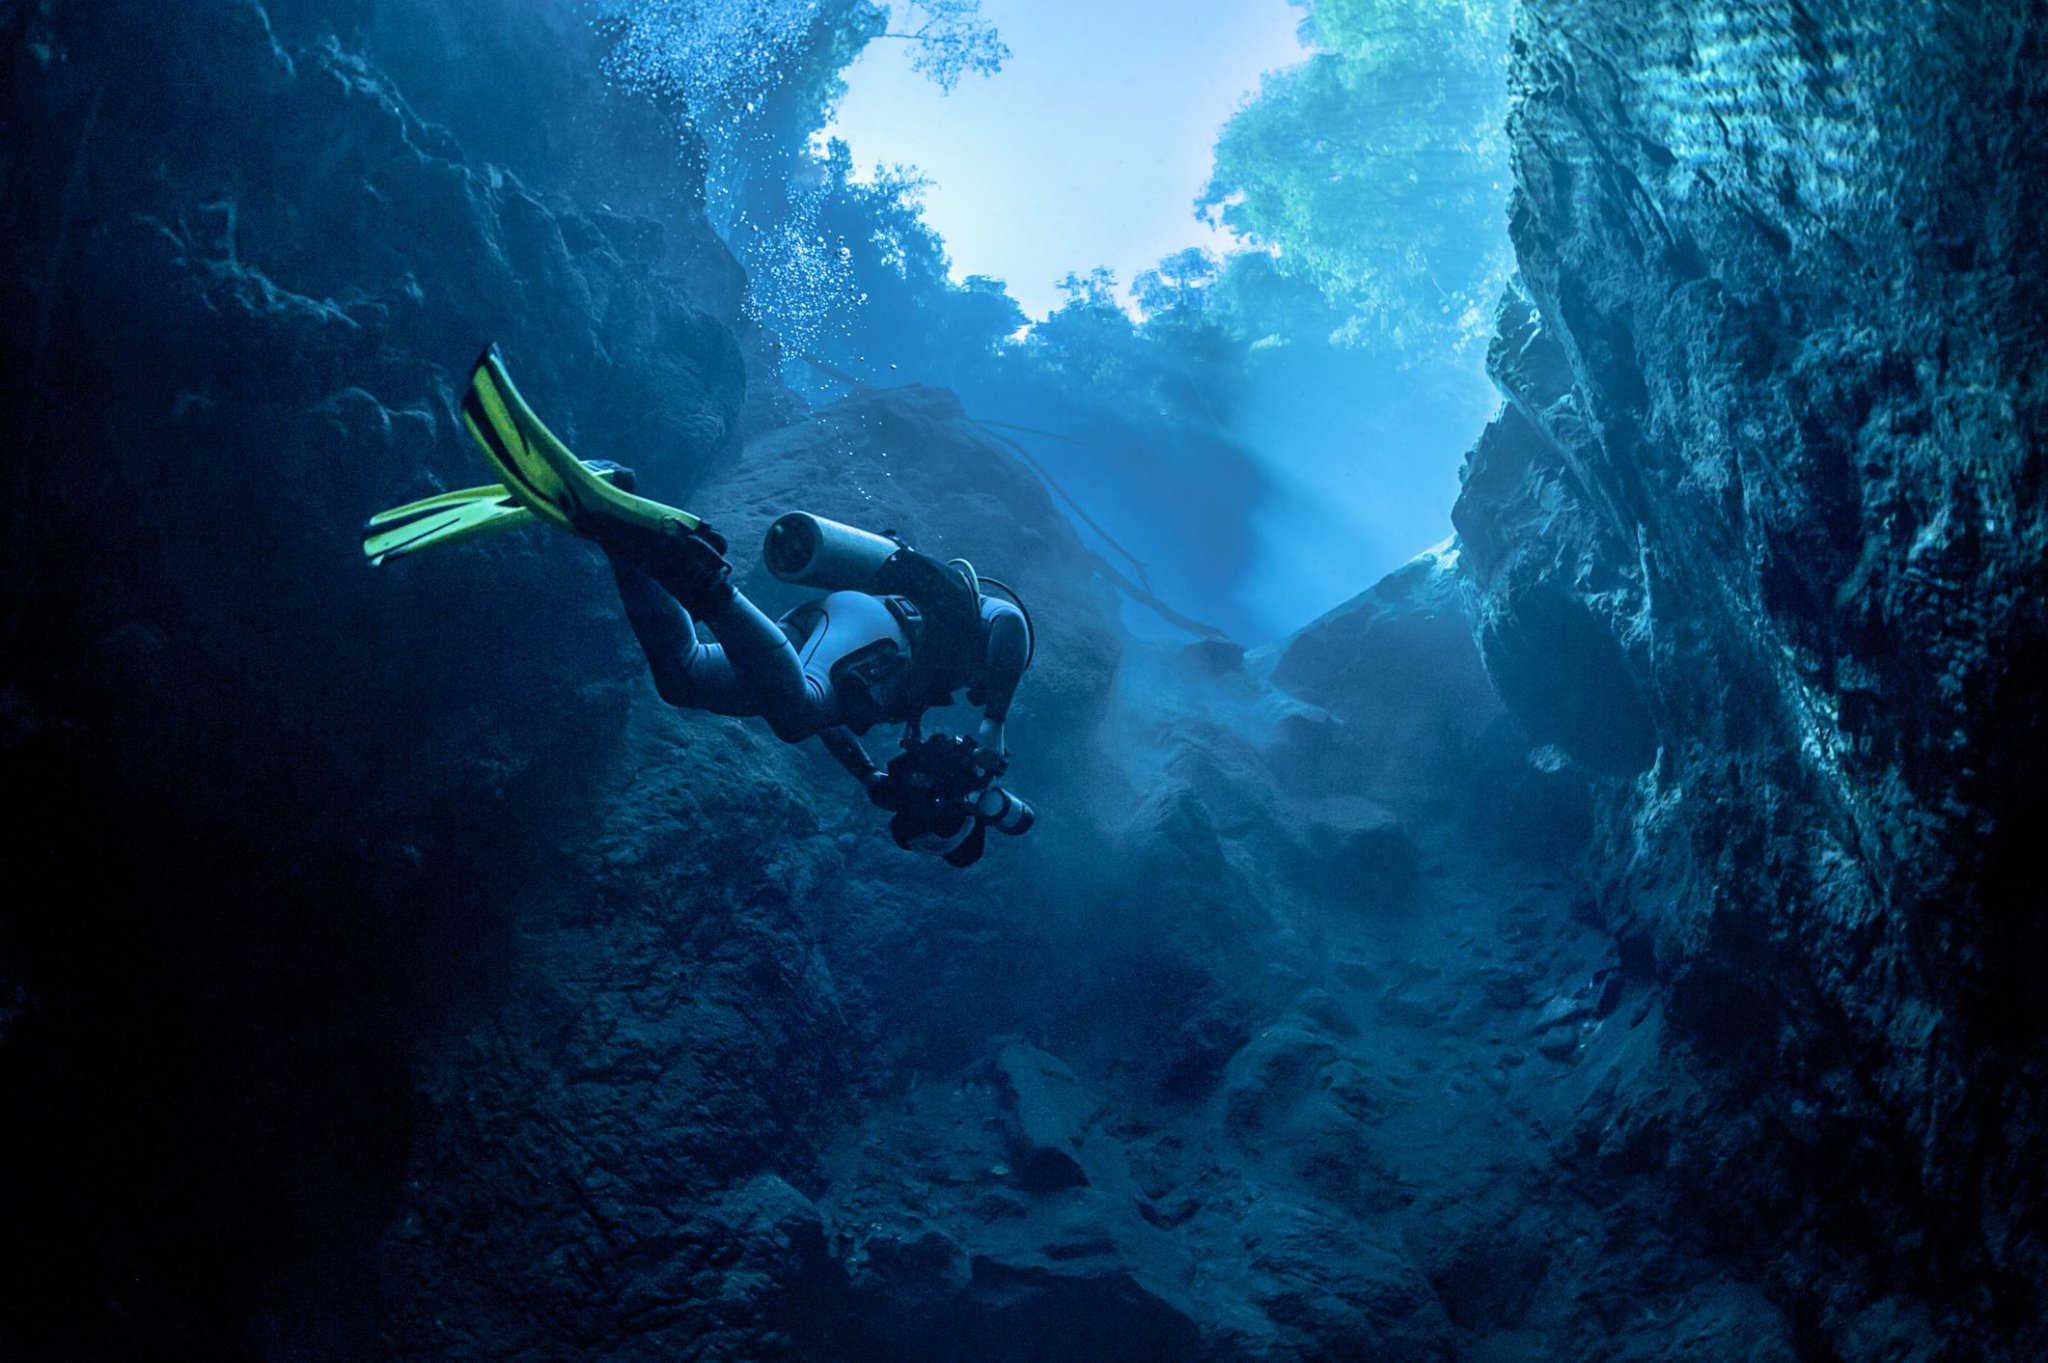 10 Essential Safety Tips All Scuba Divers Should Know